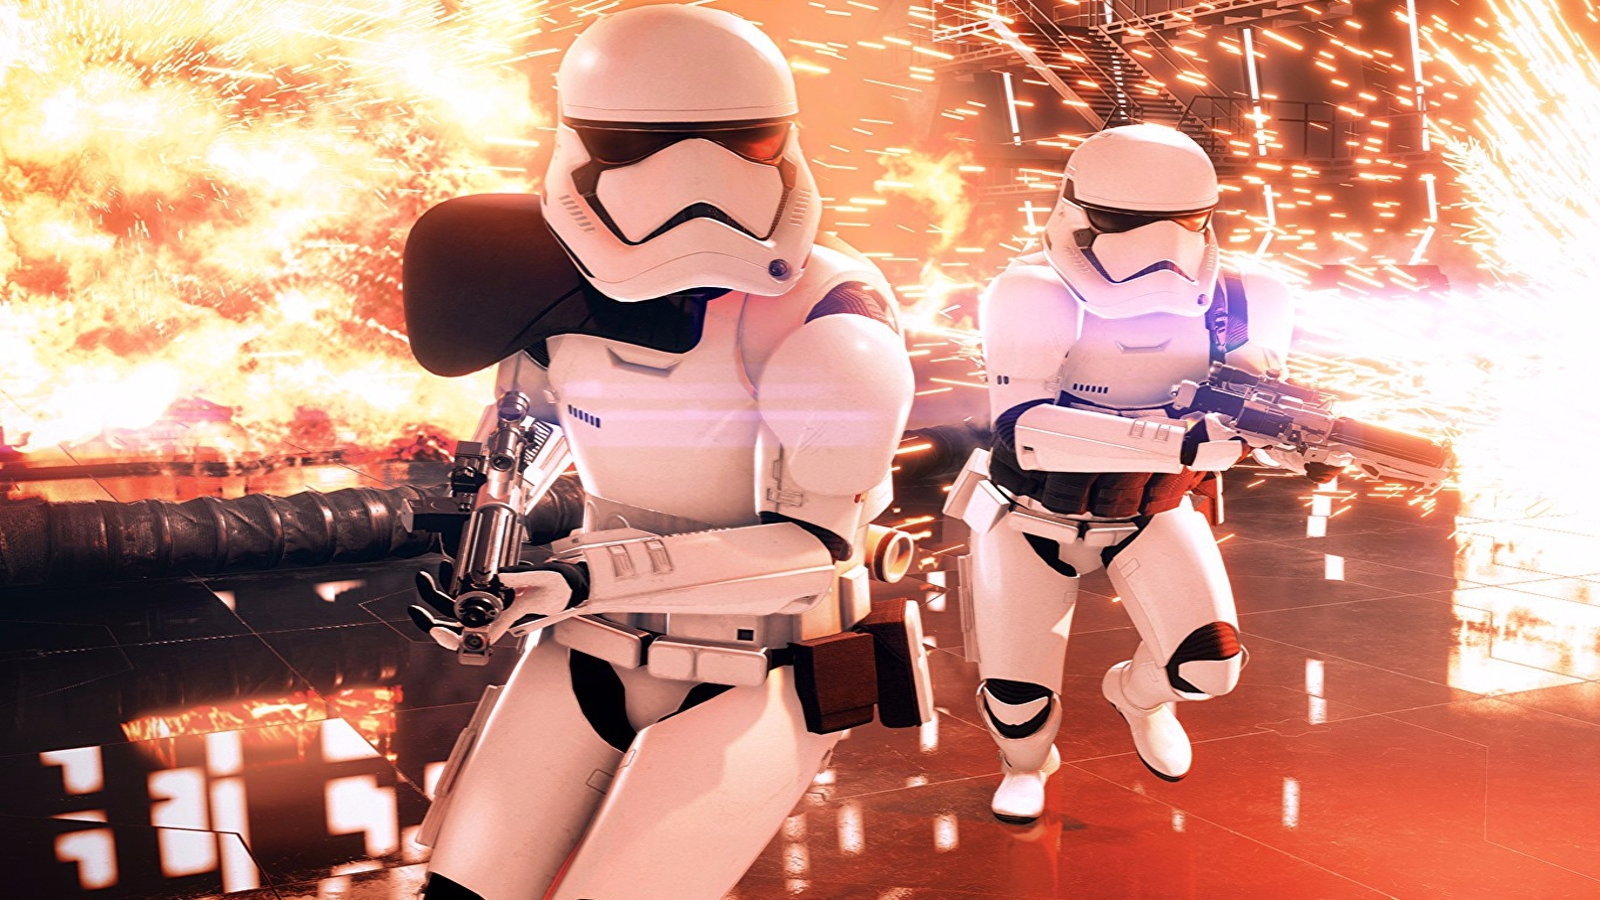 How Star Wars Battlefront 2's stunning tech scales across consoles